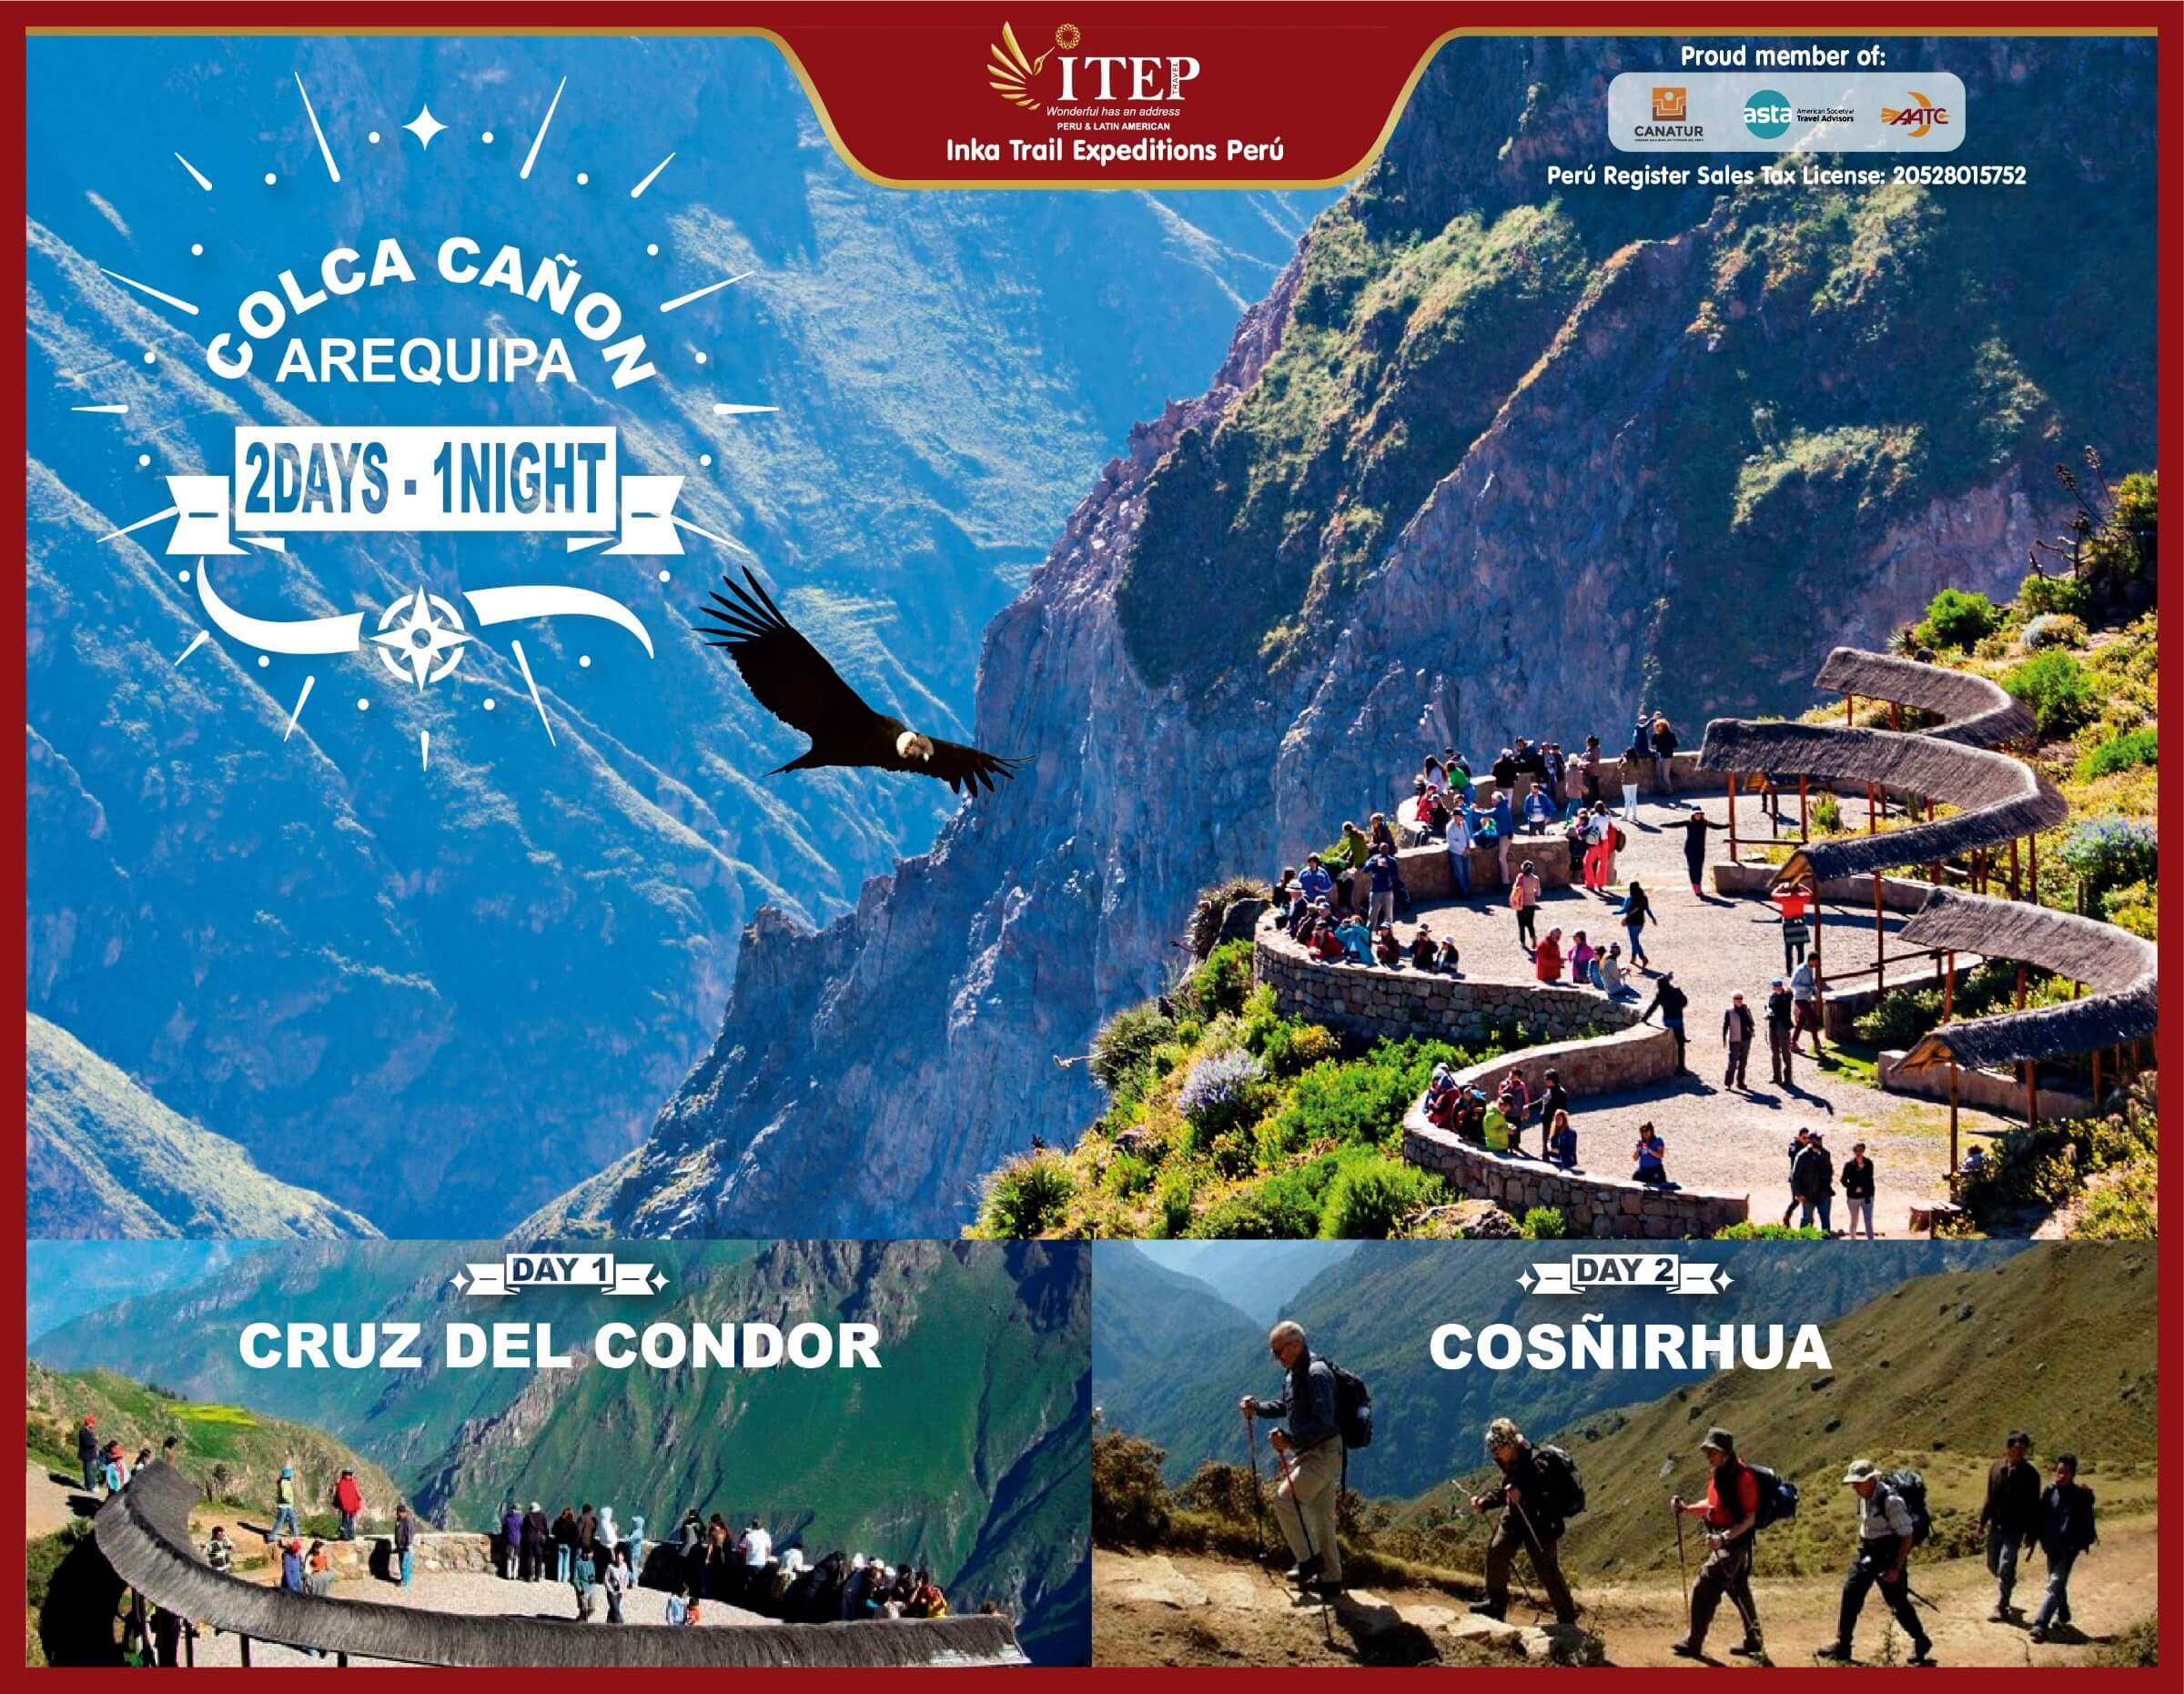 Colca Canyon 2 Days package